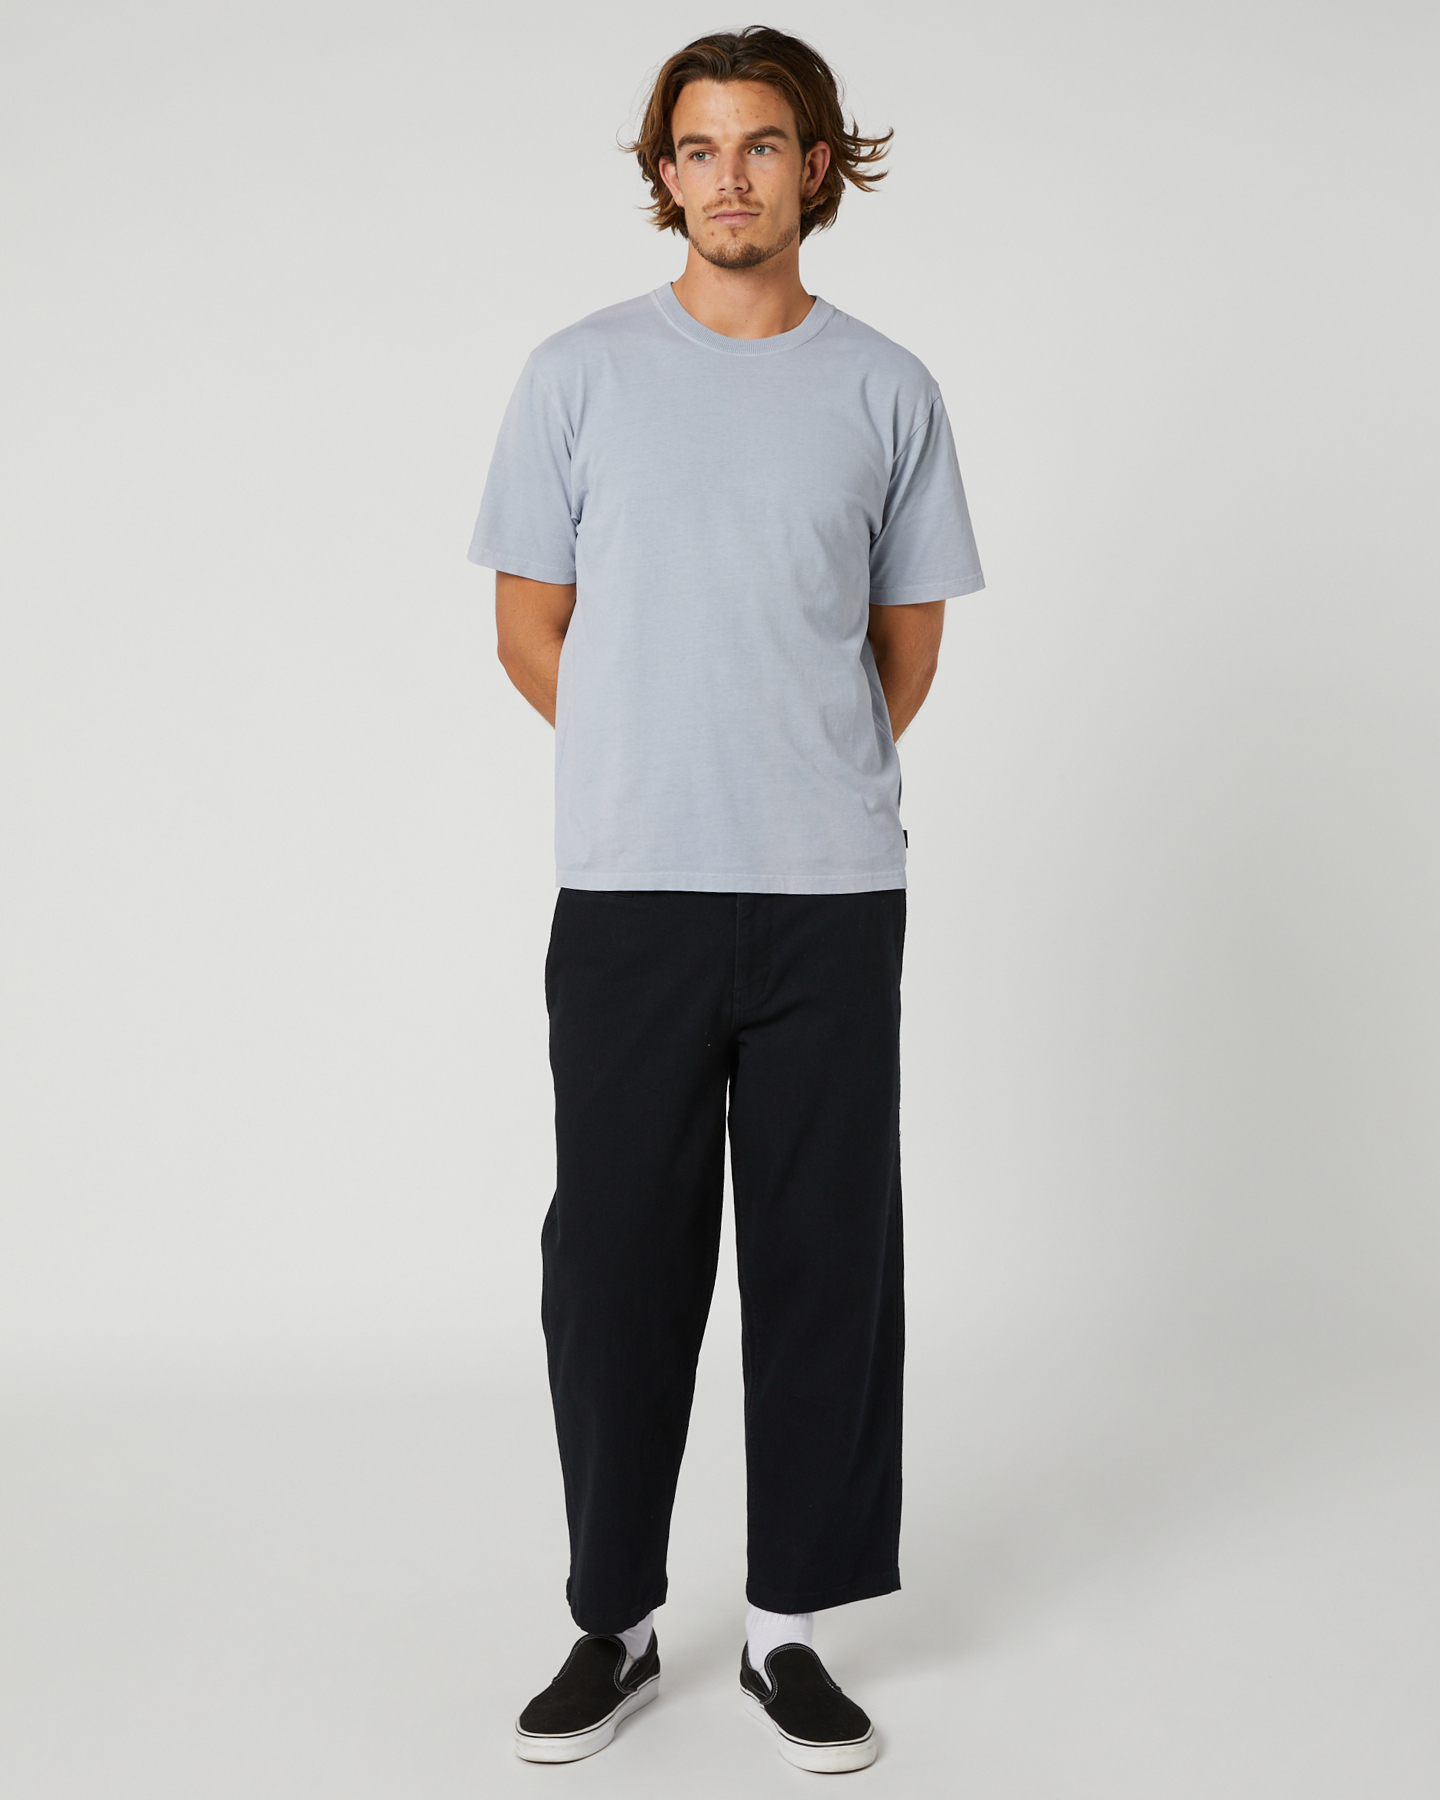 Rip Curl Quality Surf Products Mens Pant - Black | SurfStitch